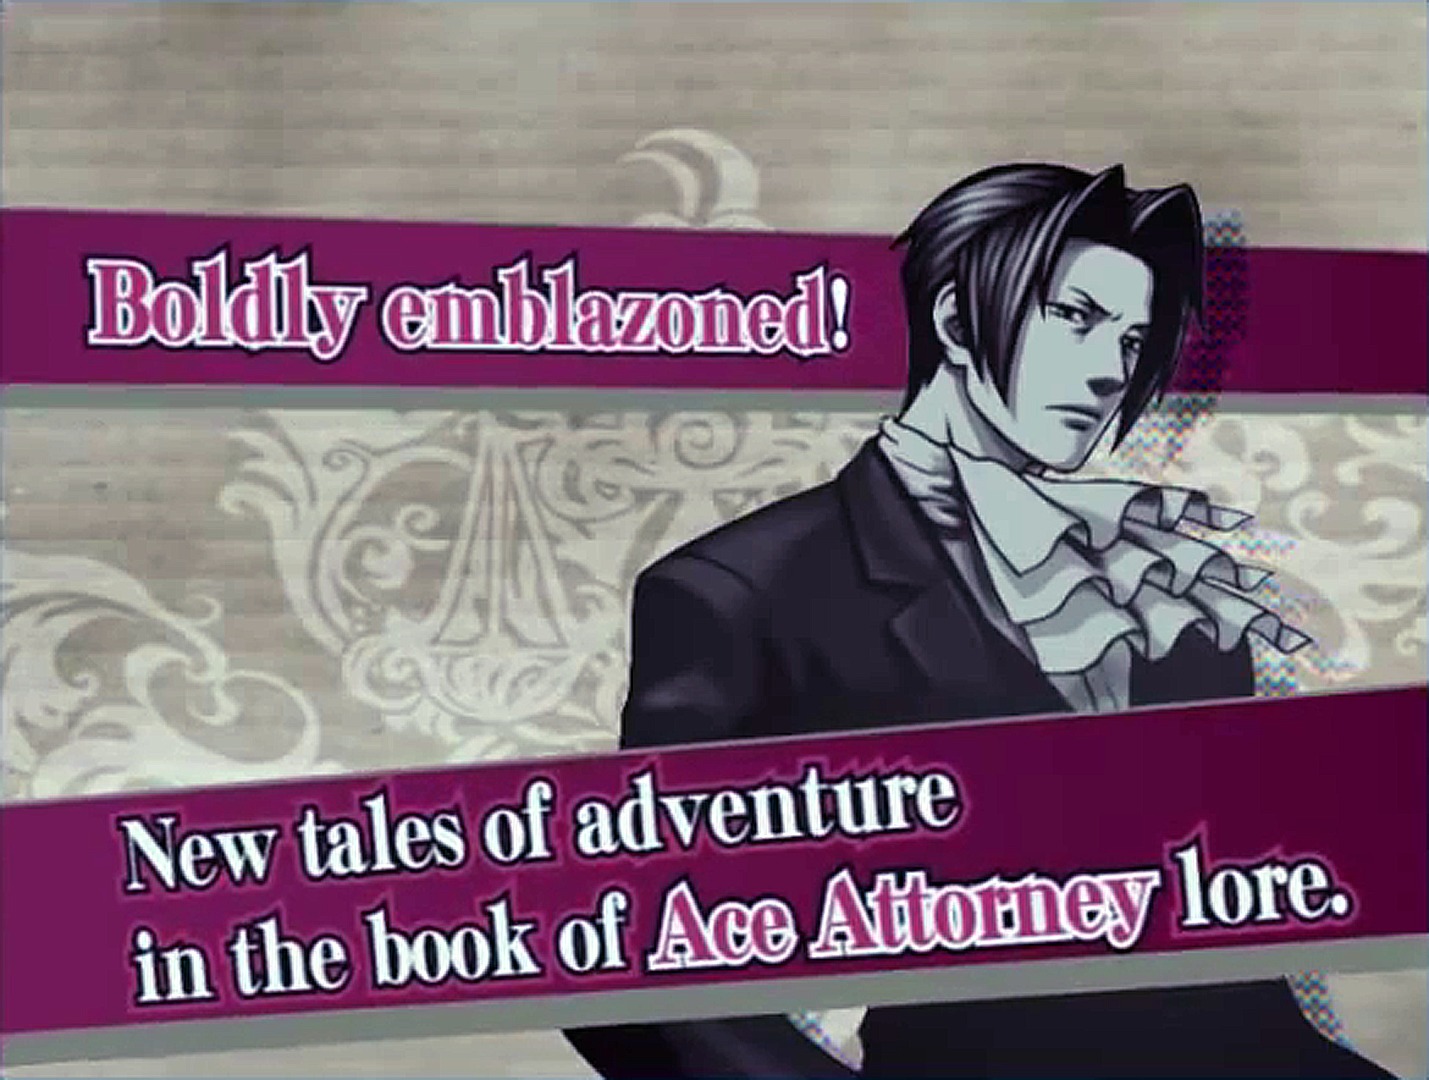 A screenshot from the Ace Attorney Investigations trailer shows Miles Edgeworth looking moody. Text in image: "Boldly emblazoned! New tales of adventure in the book of Ace Attorney lore."